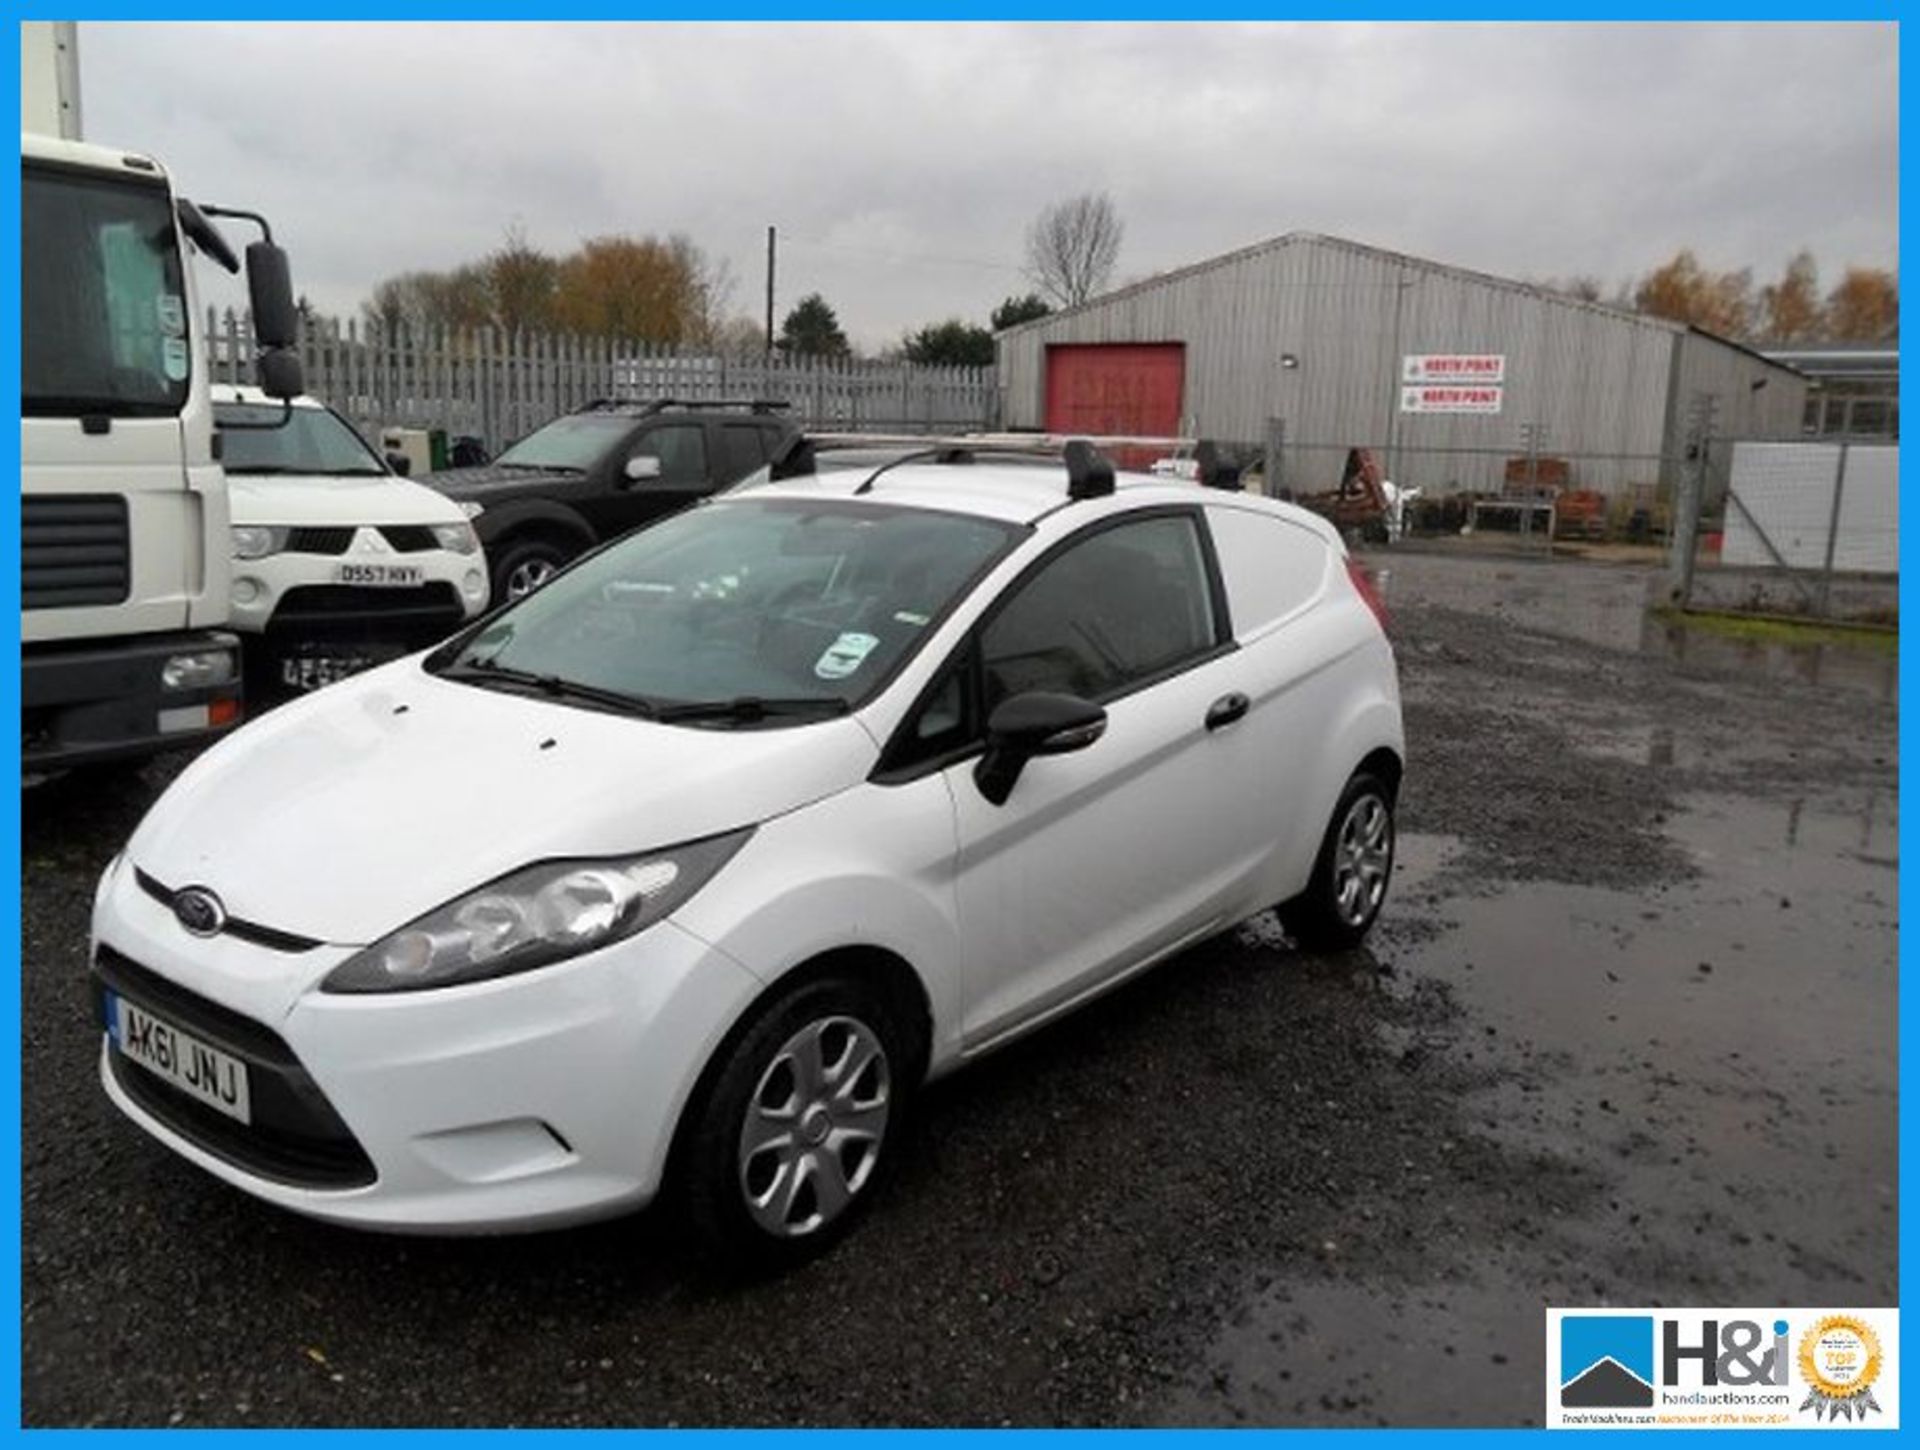 2011 FORD FIESTA BASE TDCI 1400, MOT: NOV 2016, MANUAL , SERVICE BOOK CAN BE SEEN , MILEAGE: 126,754 - Image 7 of 7